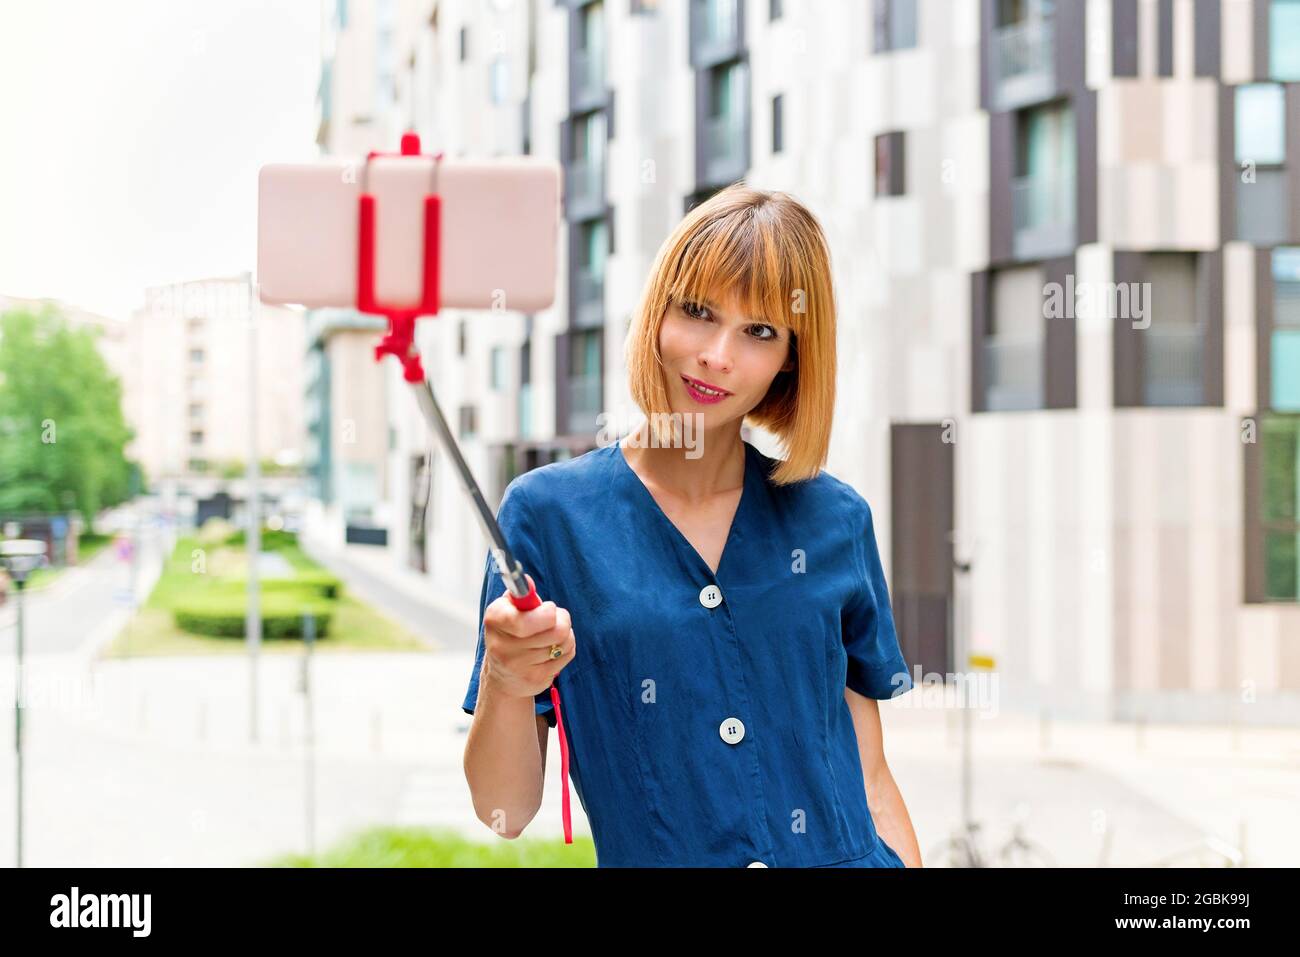 Slender attractive woman taking a selfie on a city street using her mobile phone on a selfie stick as she smiles quietly for the camera in a high key Stock Photo